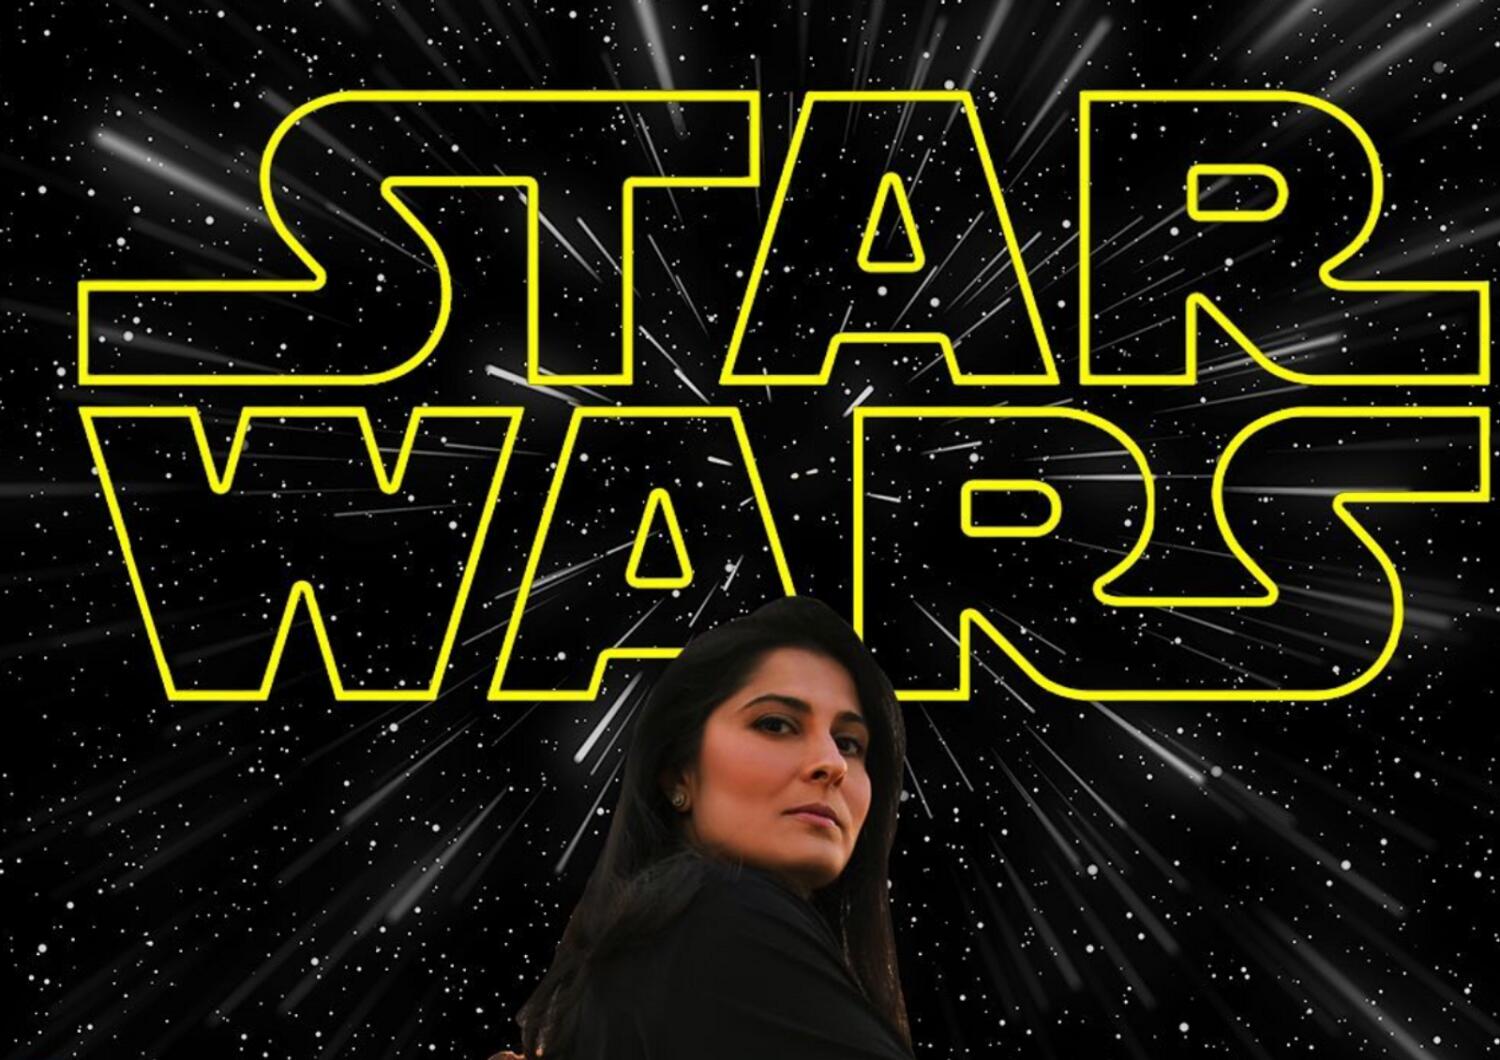 Oscar-winning Pakistani, Sharmeen Obaid, to become first woman and person of colour to direct a Star Wars movie